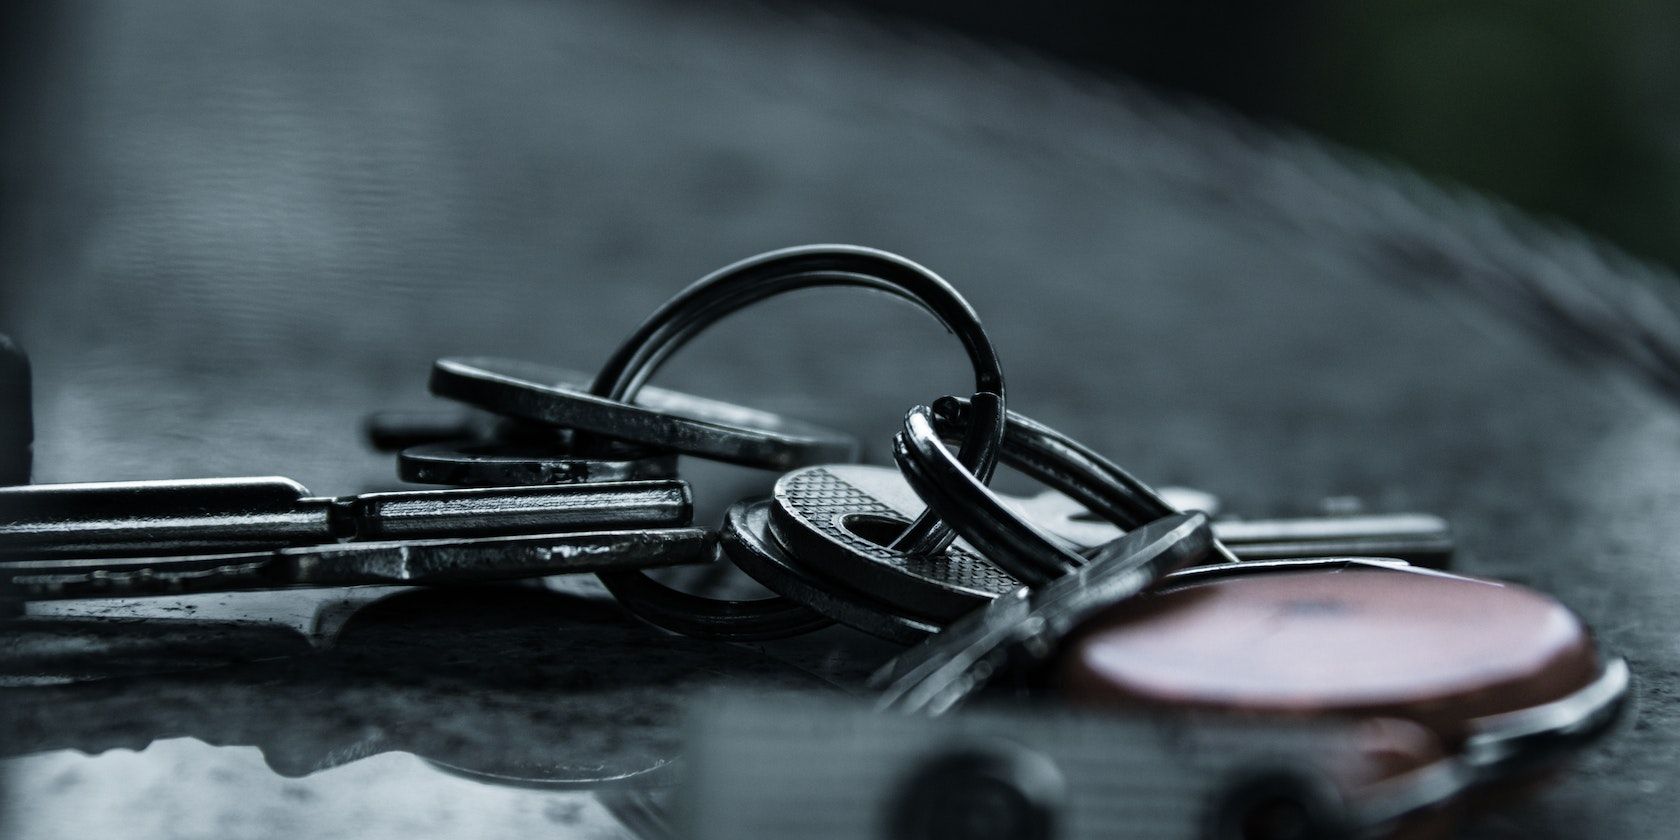 Are Security Keys Worth It? The Pros and Cons of This 2FA Method